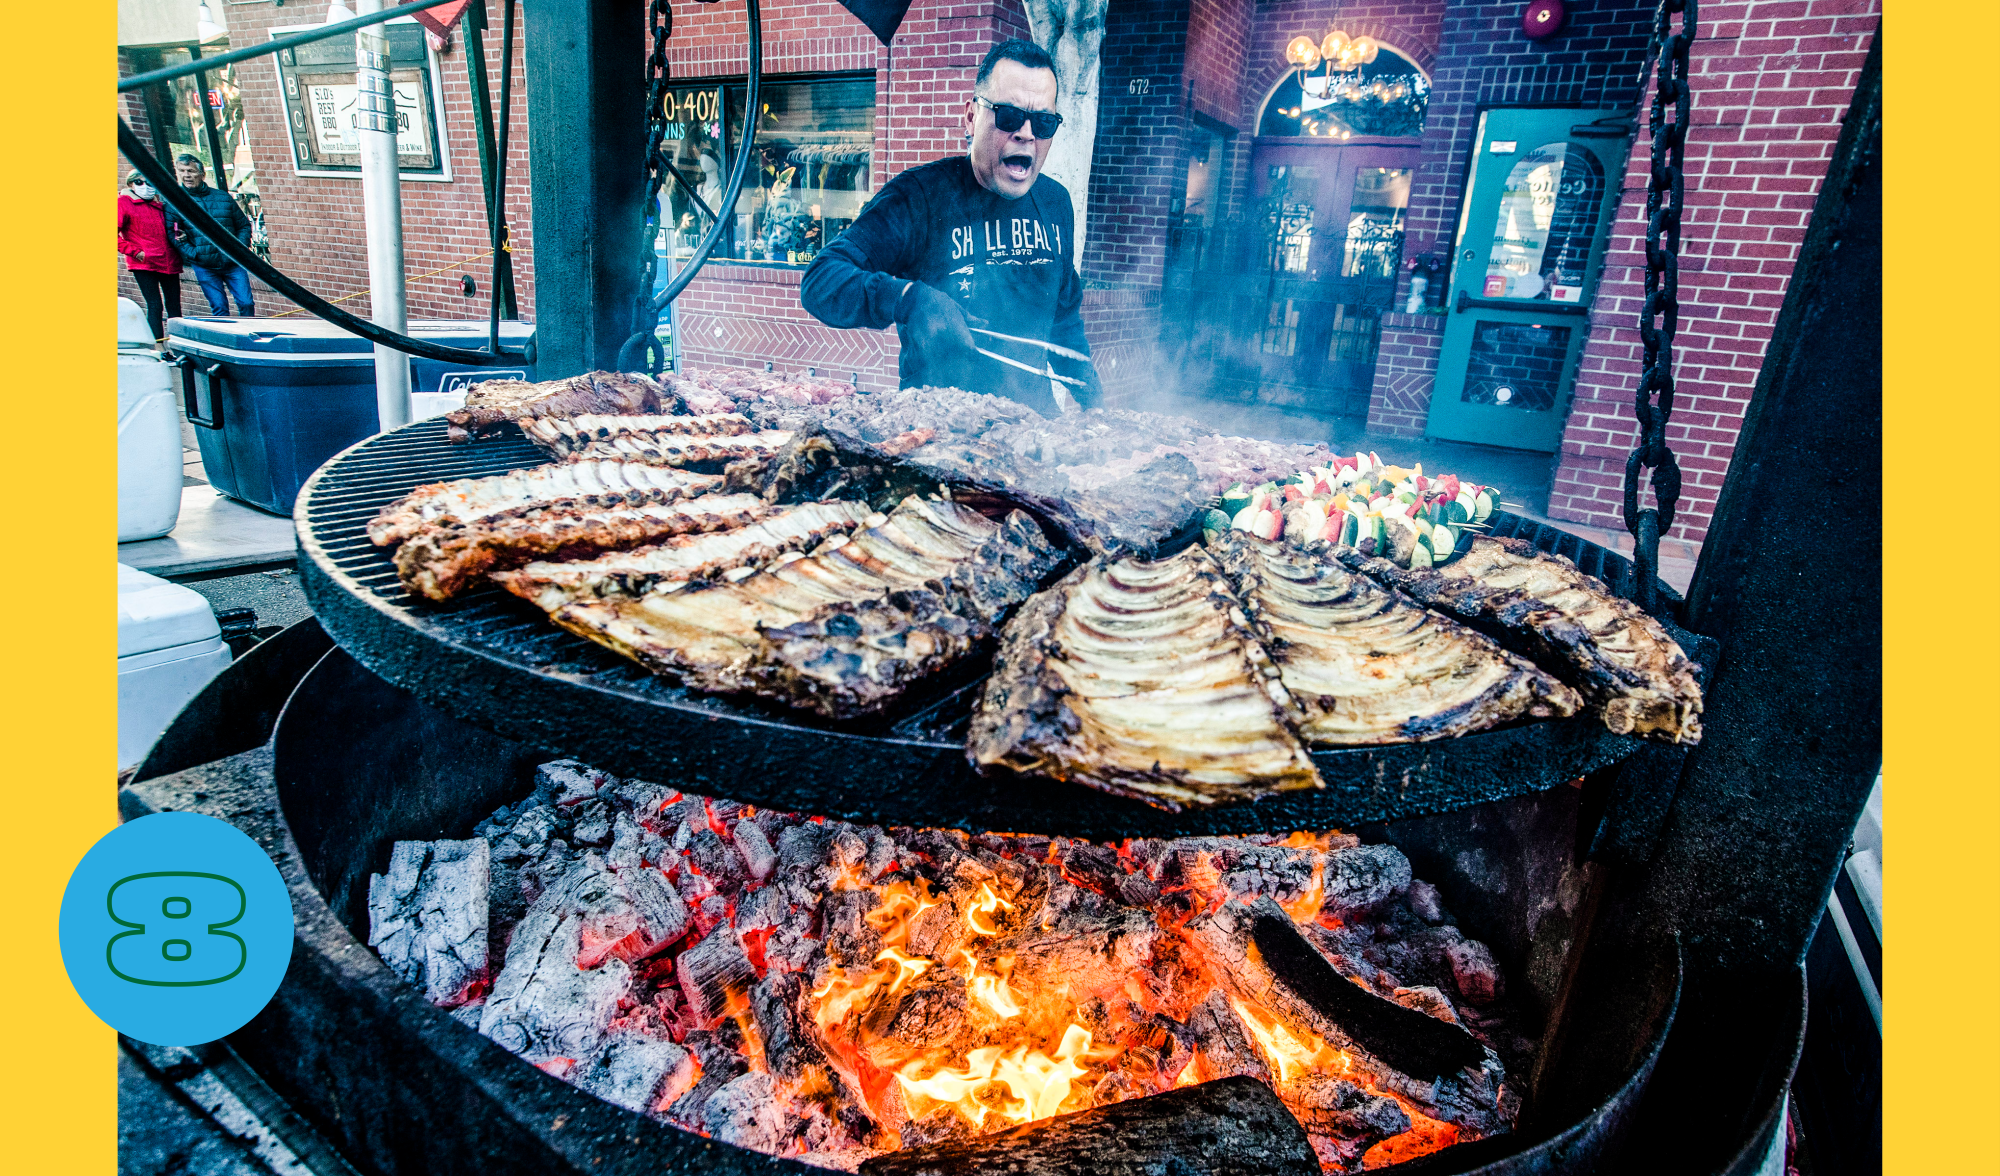 Chef Victor Albarron tends the F. McClintocks barbecue pit, full of ribs and other meats, at an outdoor market.